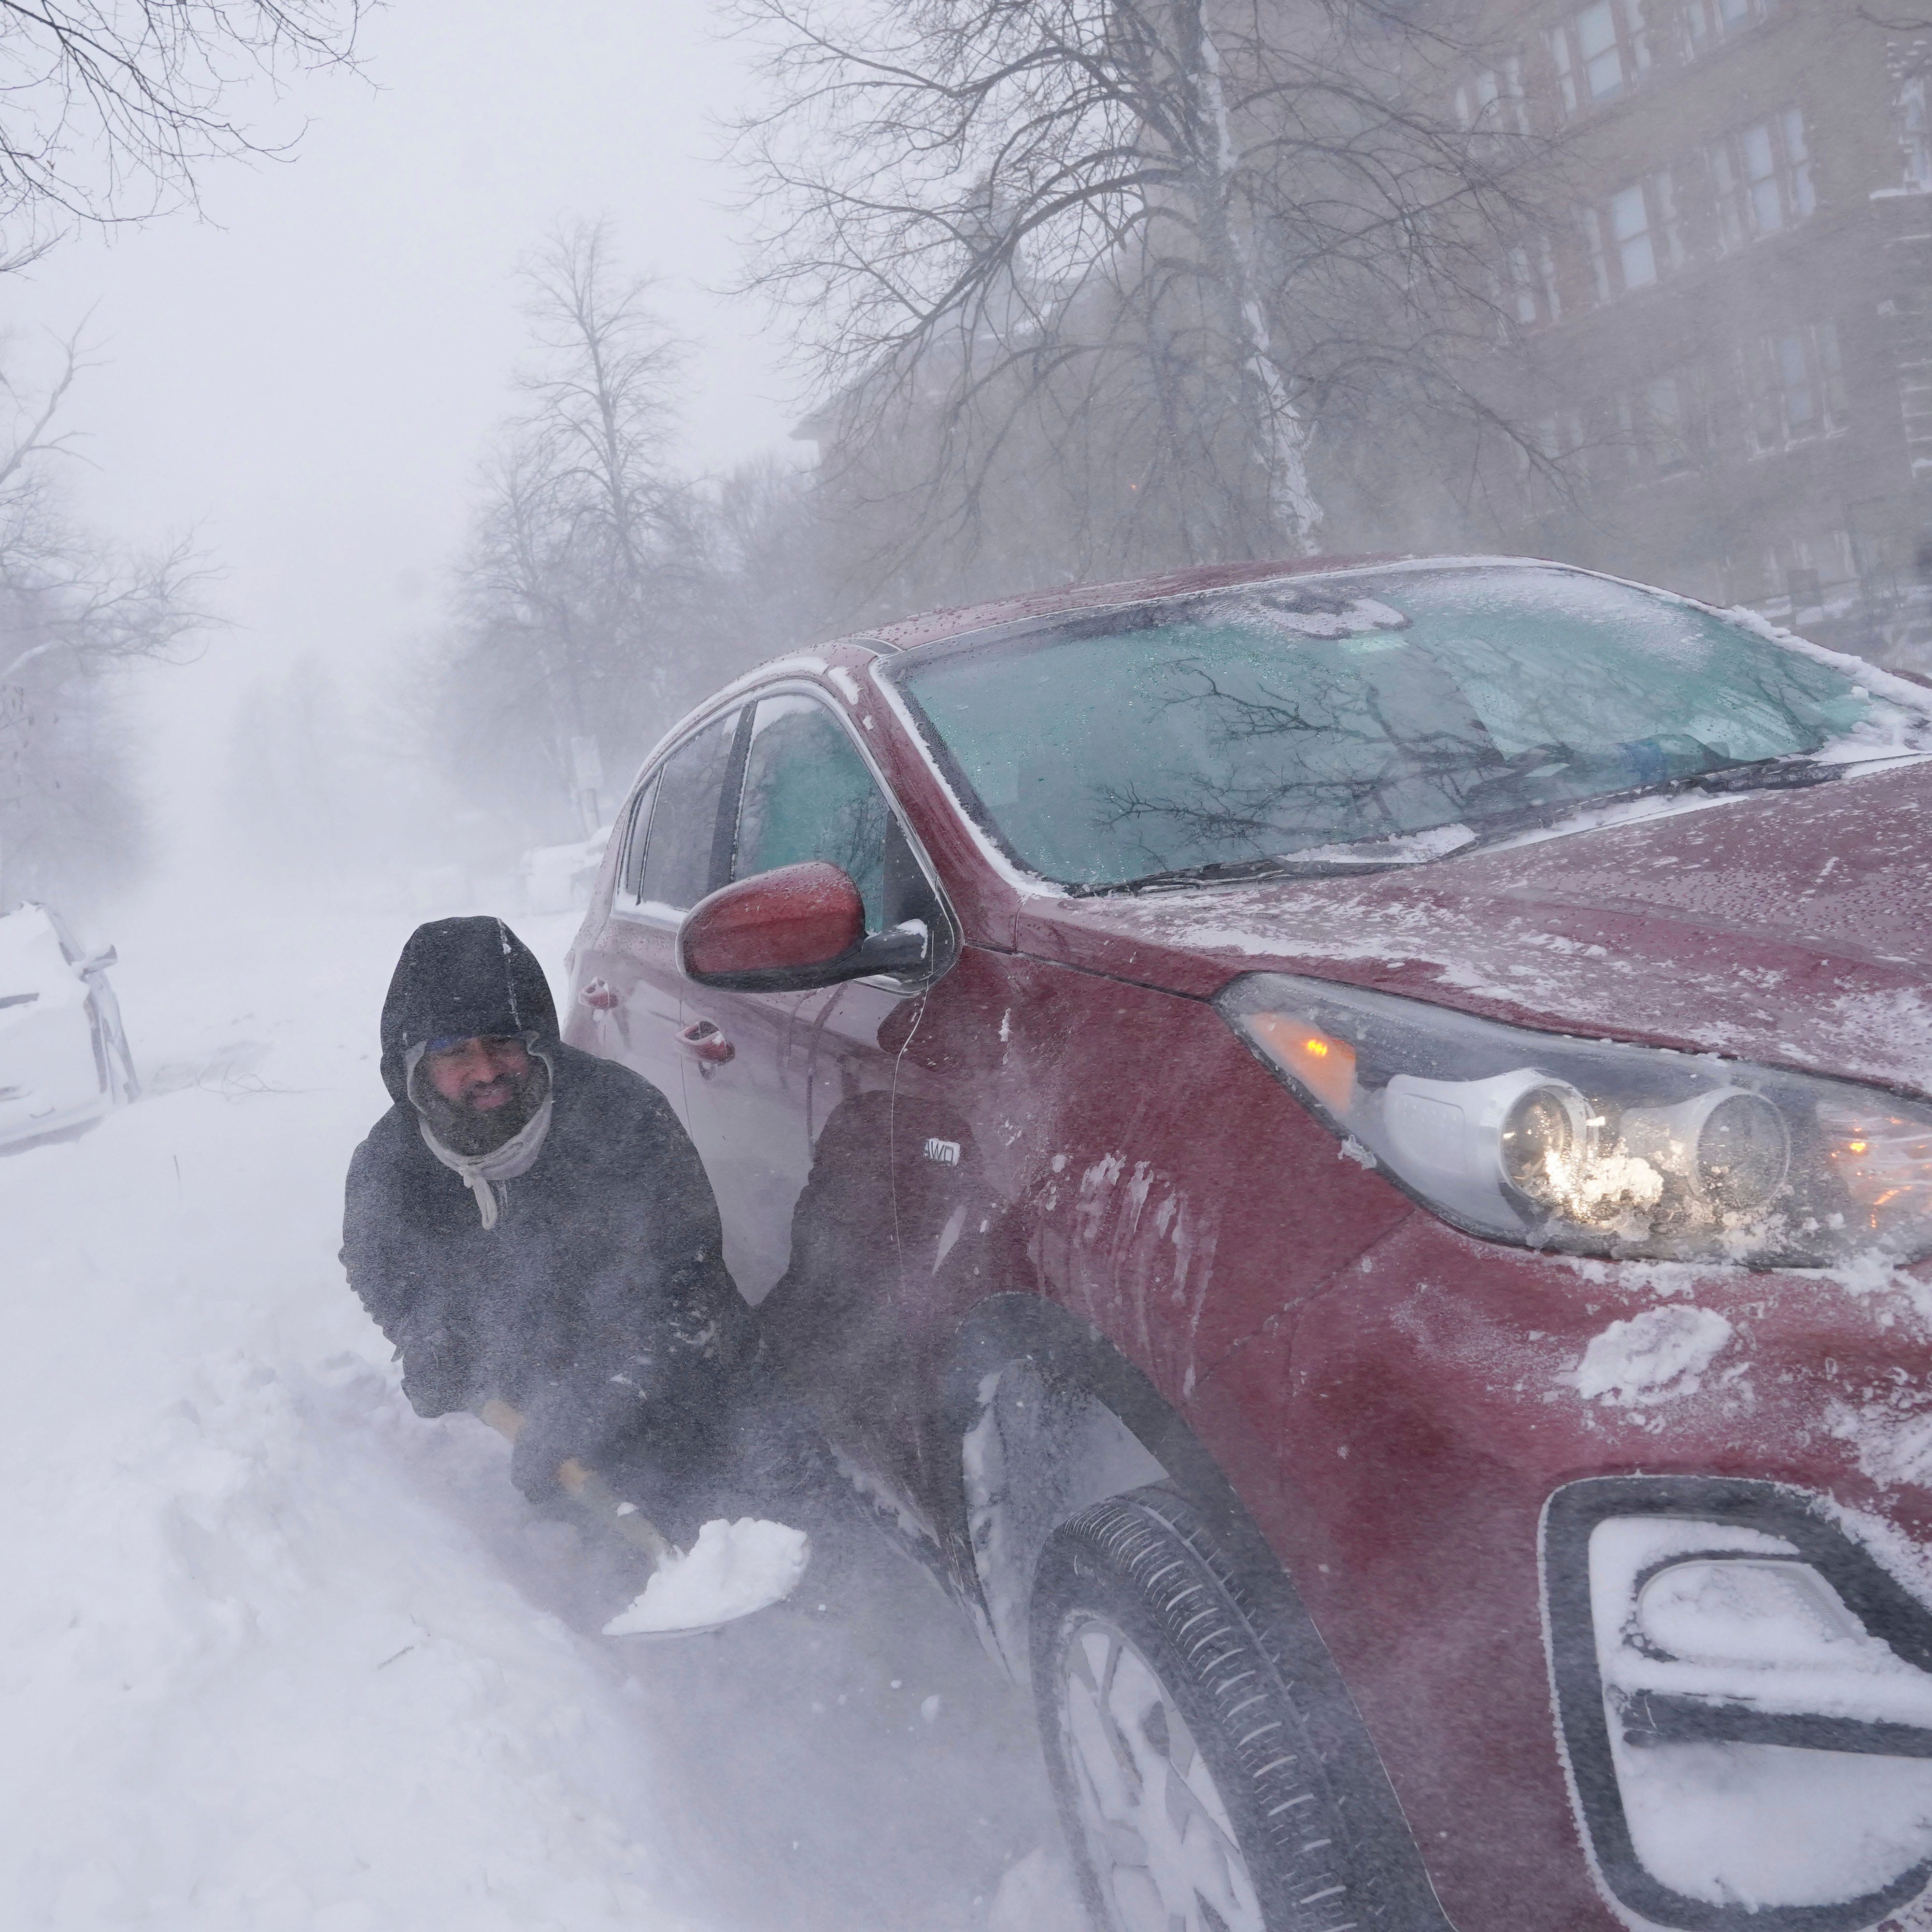 Gamaliel Vega tries to dig out his car on Lafayette Avenue after he got stuck in a snowdrift about a block from home while trying to help rescue his cousin, who had lost power and heat with a baby at home across town during a blizzard in Buffalo, N.Y., on Saturday, Dec. 24, 2022.